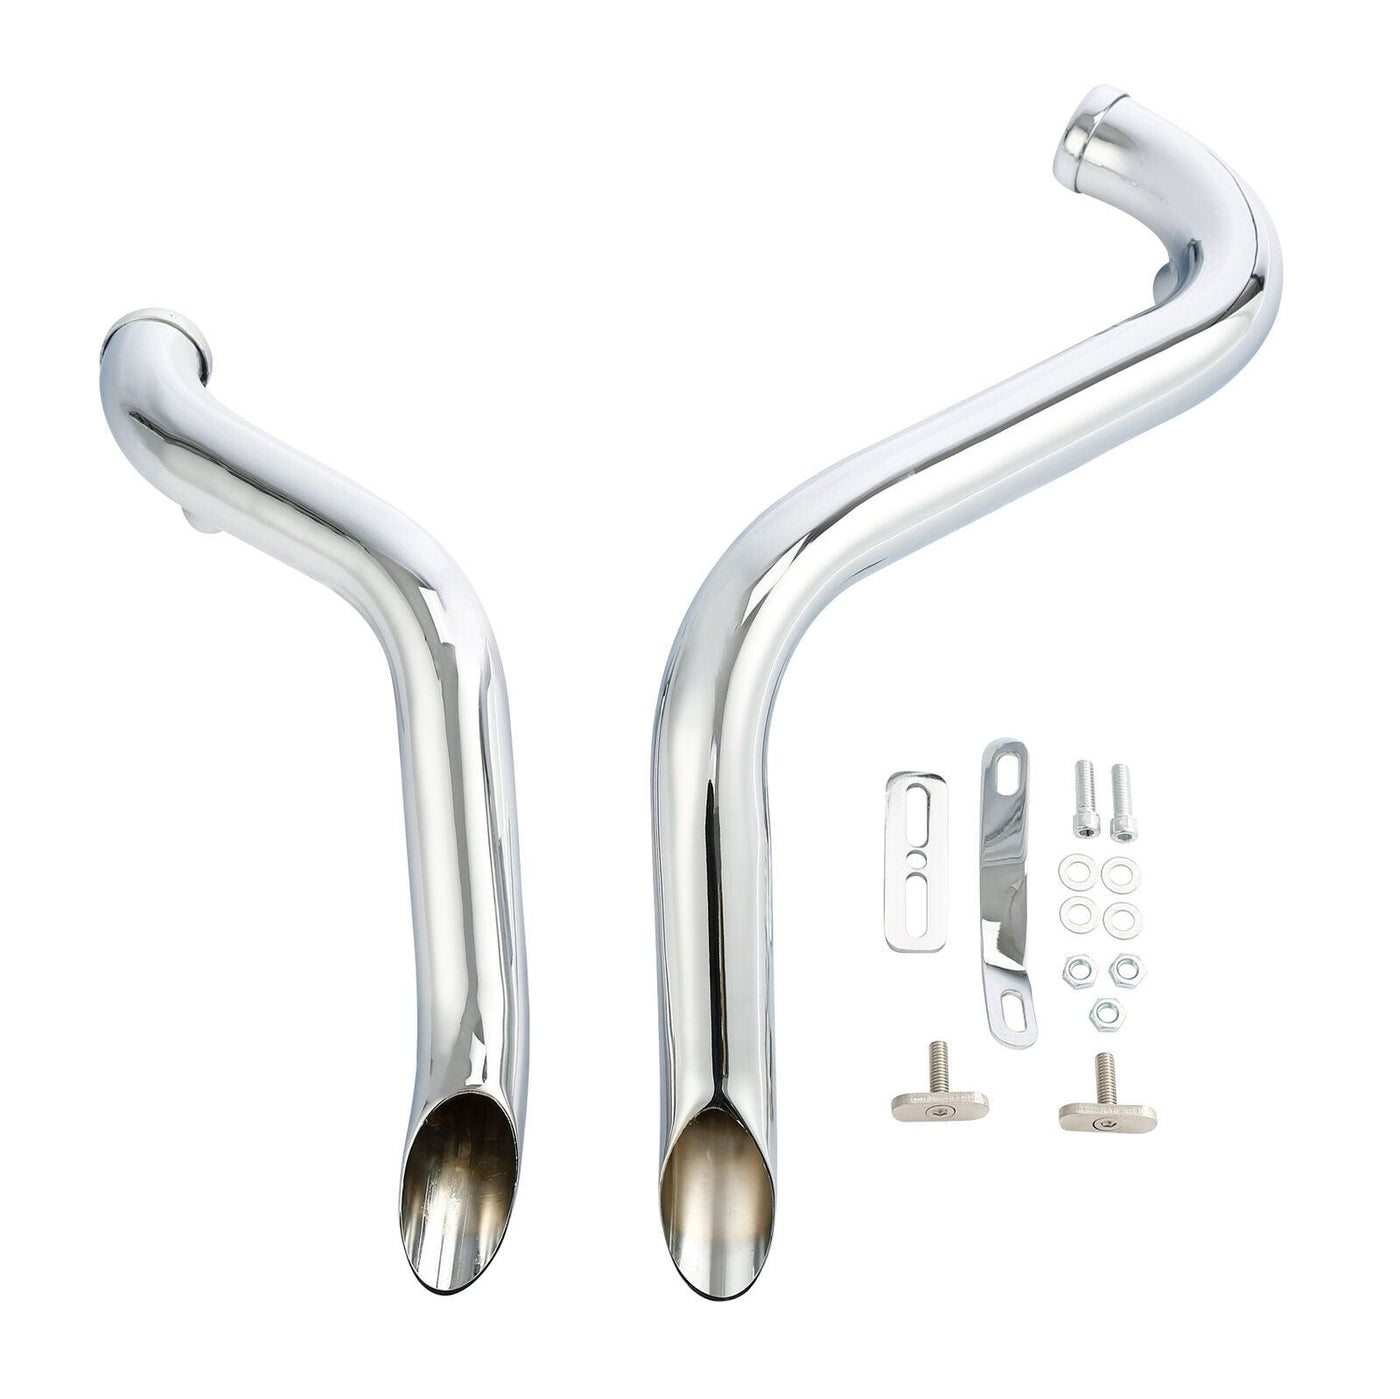 1.75" Pipes Exhaust Fit For Harley Touring 84-16 Sportster 86-13 Softail  86-17 - Moto Life Products